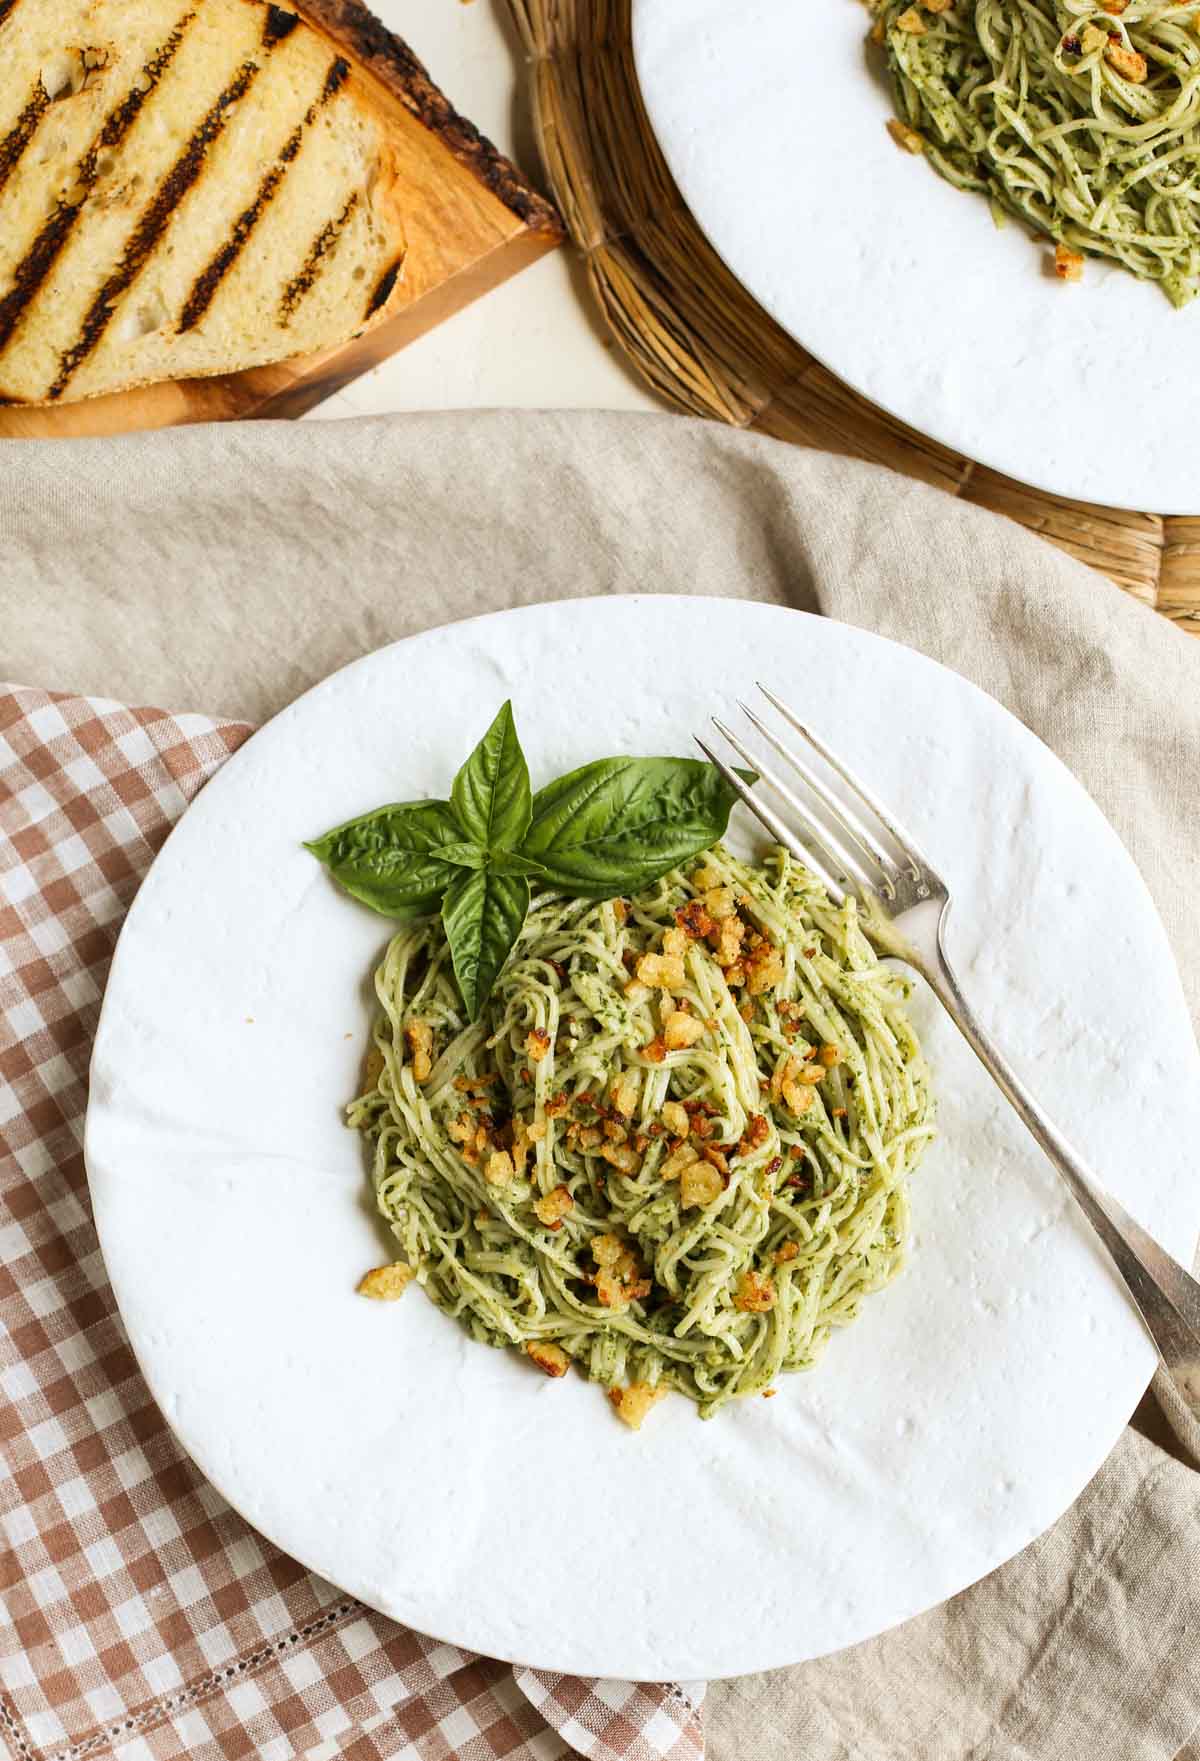 Pecan Pesto with Garlicky Breadcrumbs | One of the best EVER! recipes. The garlicky breadcrumbs with lemon zest make the dish. Serve alone or with grilled shrimp or salmon. | WorldofPastabilities.com